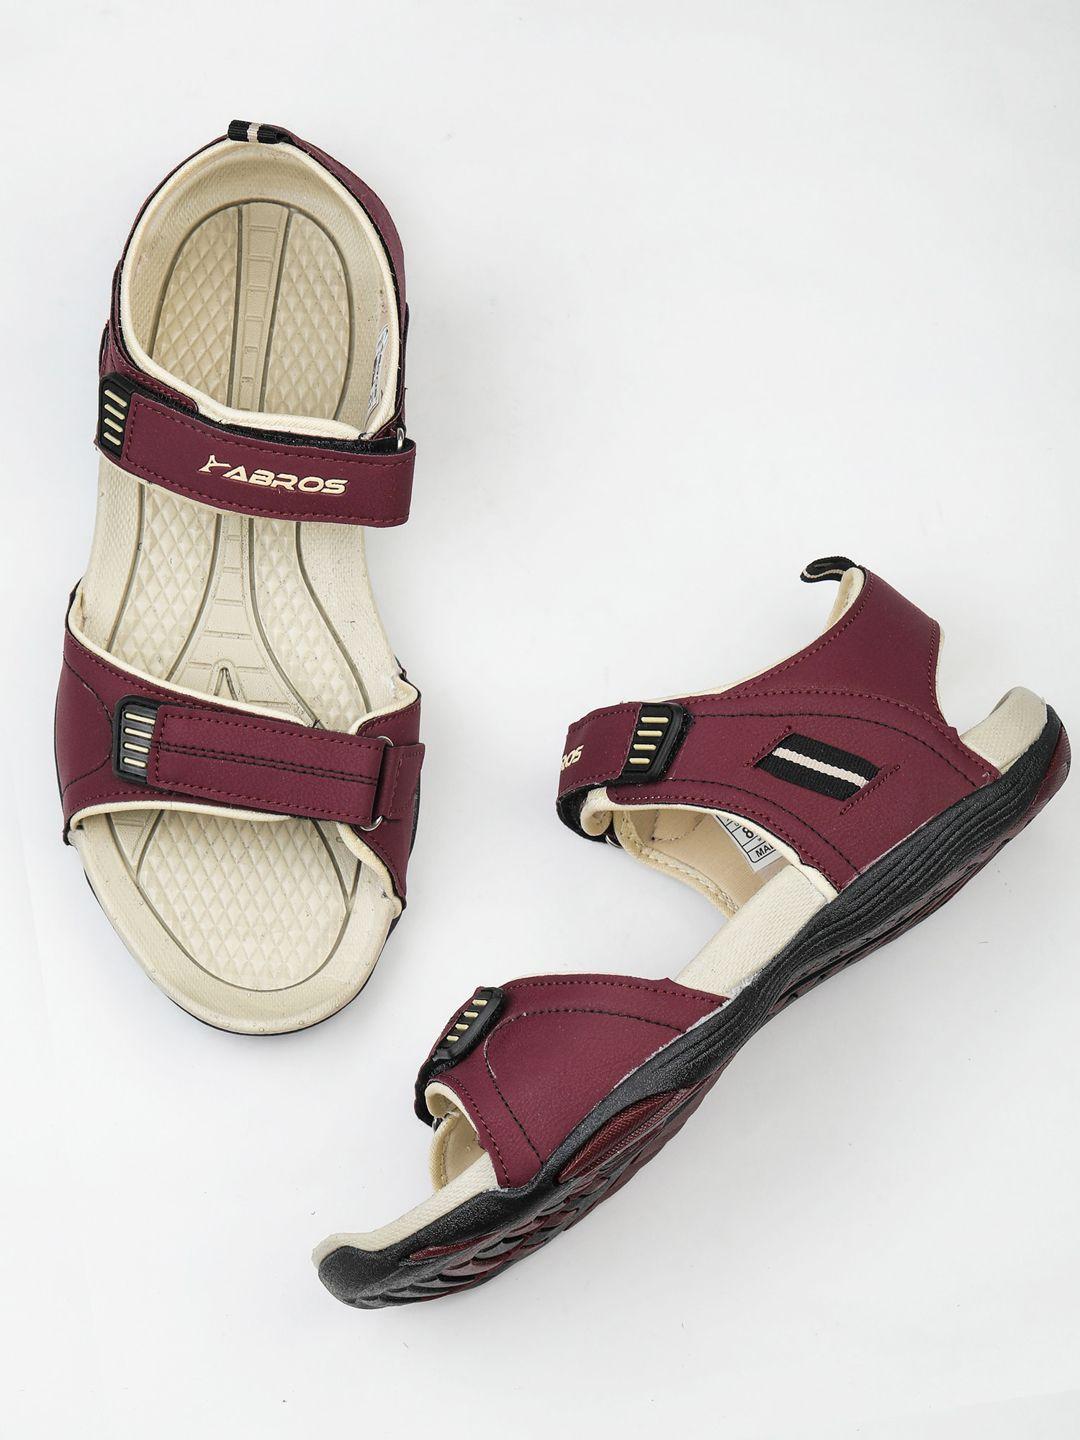 abros-men-maroon-patterned-sports-sandals